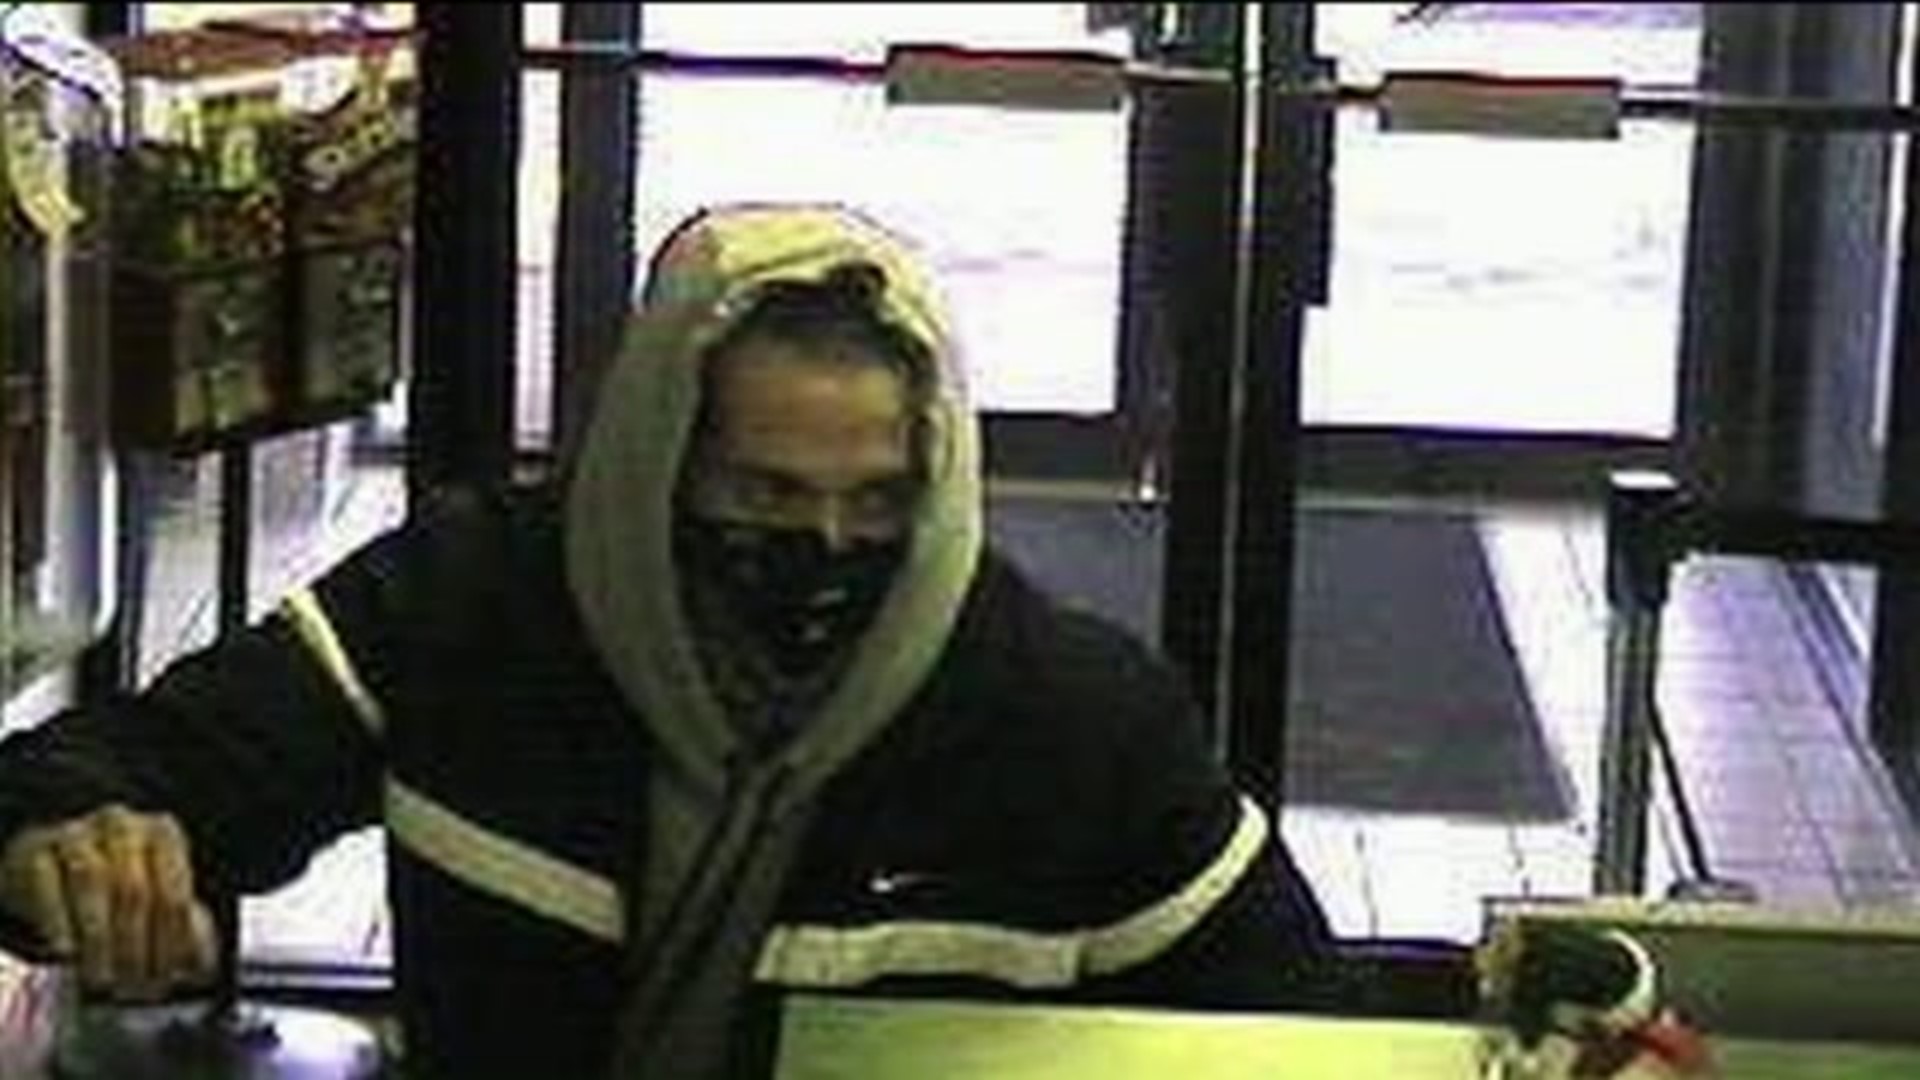 Bank Robberies: The Value of Witnesses